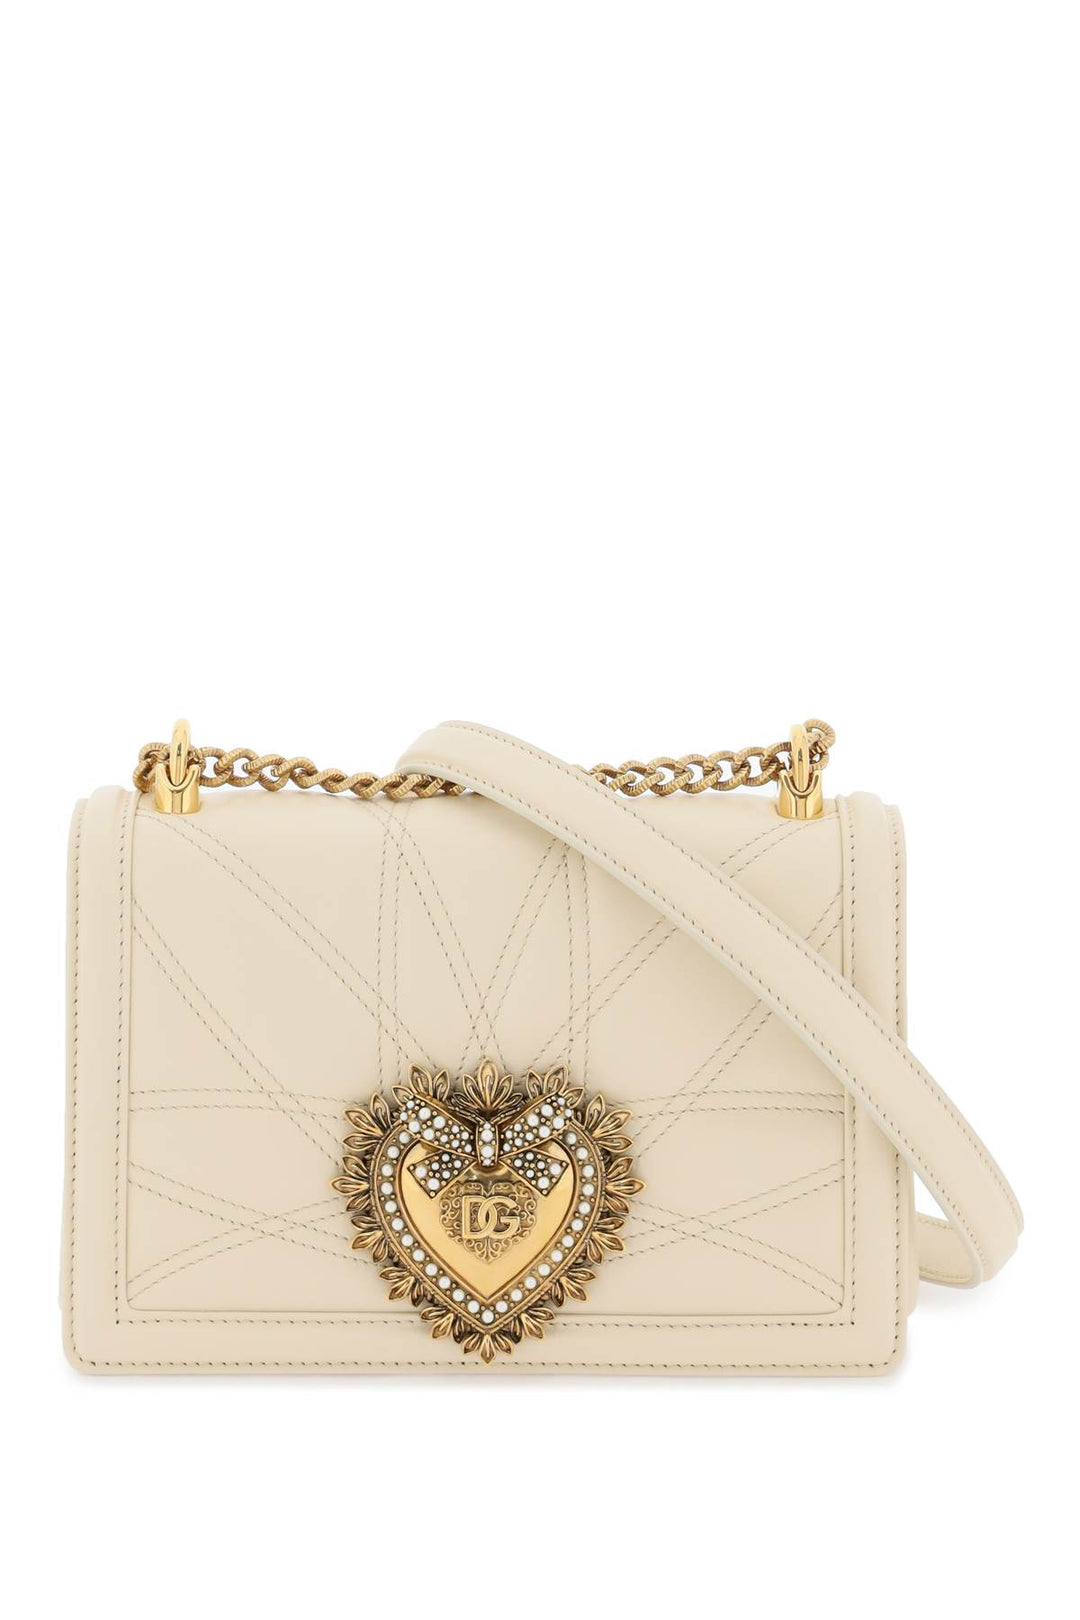 Dolce & Gabbana Medium Devotion Bag In Quilted Nappa Leather   Bianco